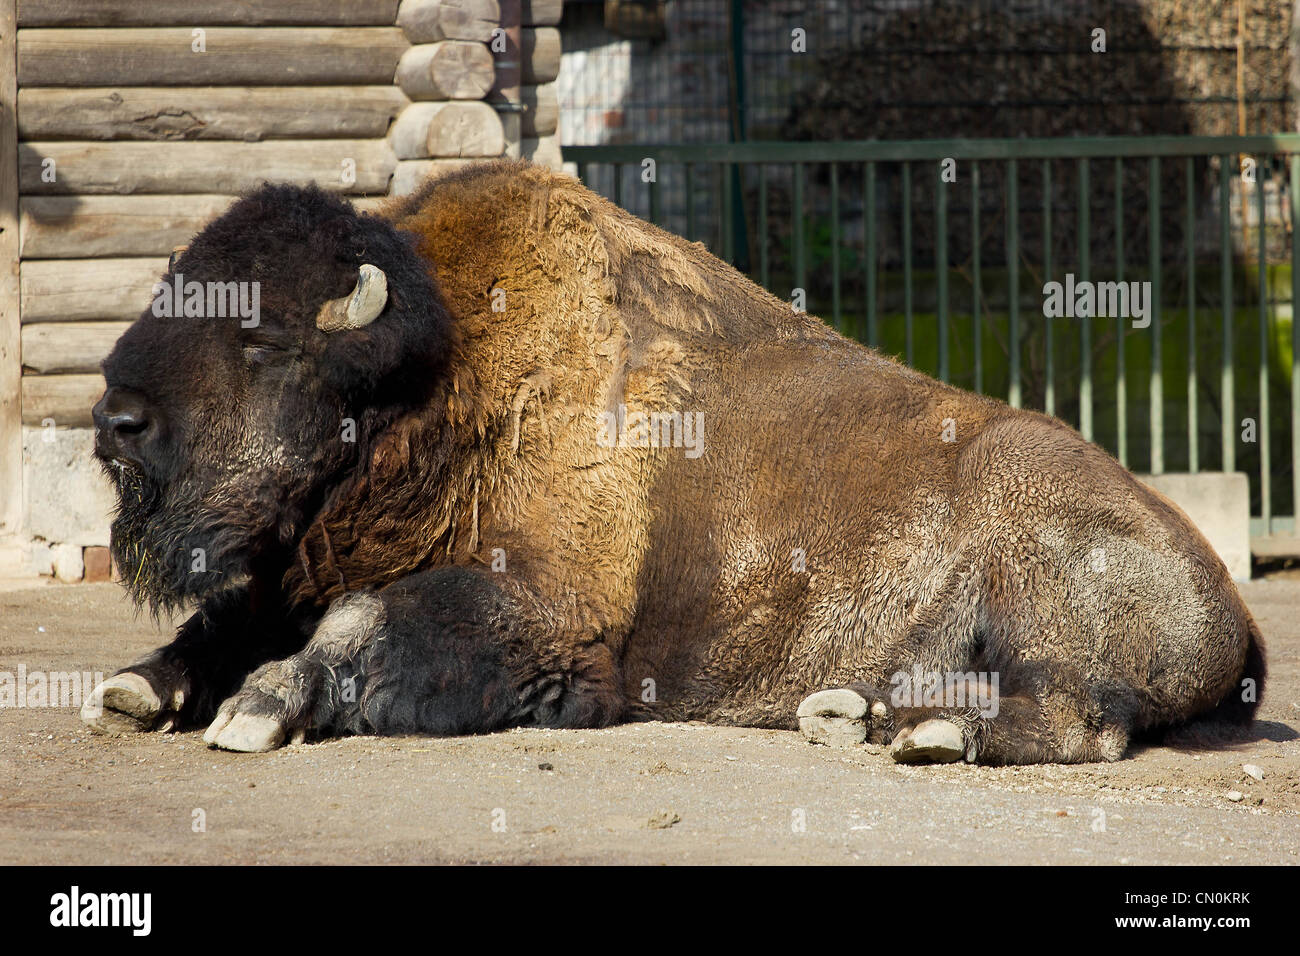 A bison lying down and enjoying the sun Stock Photo